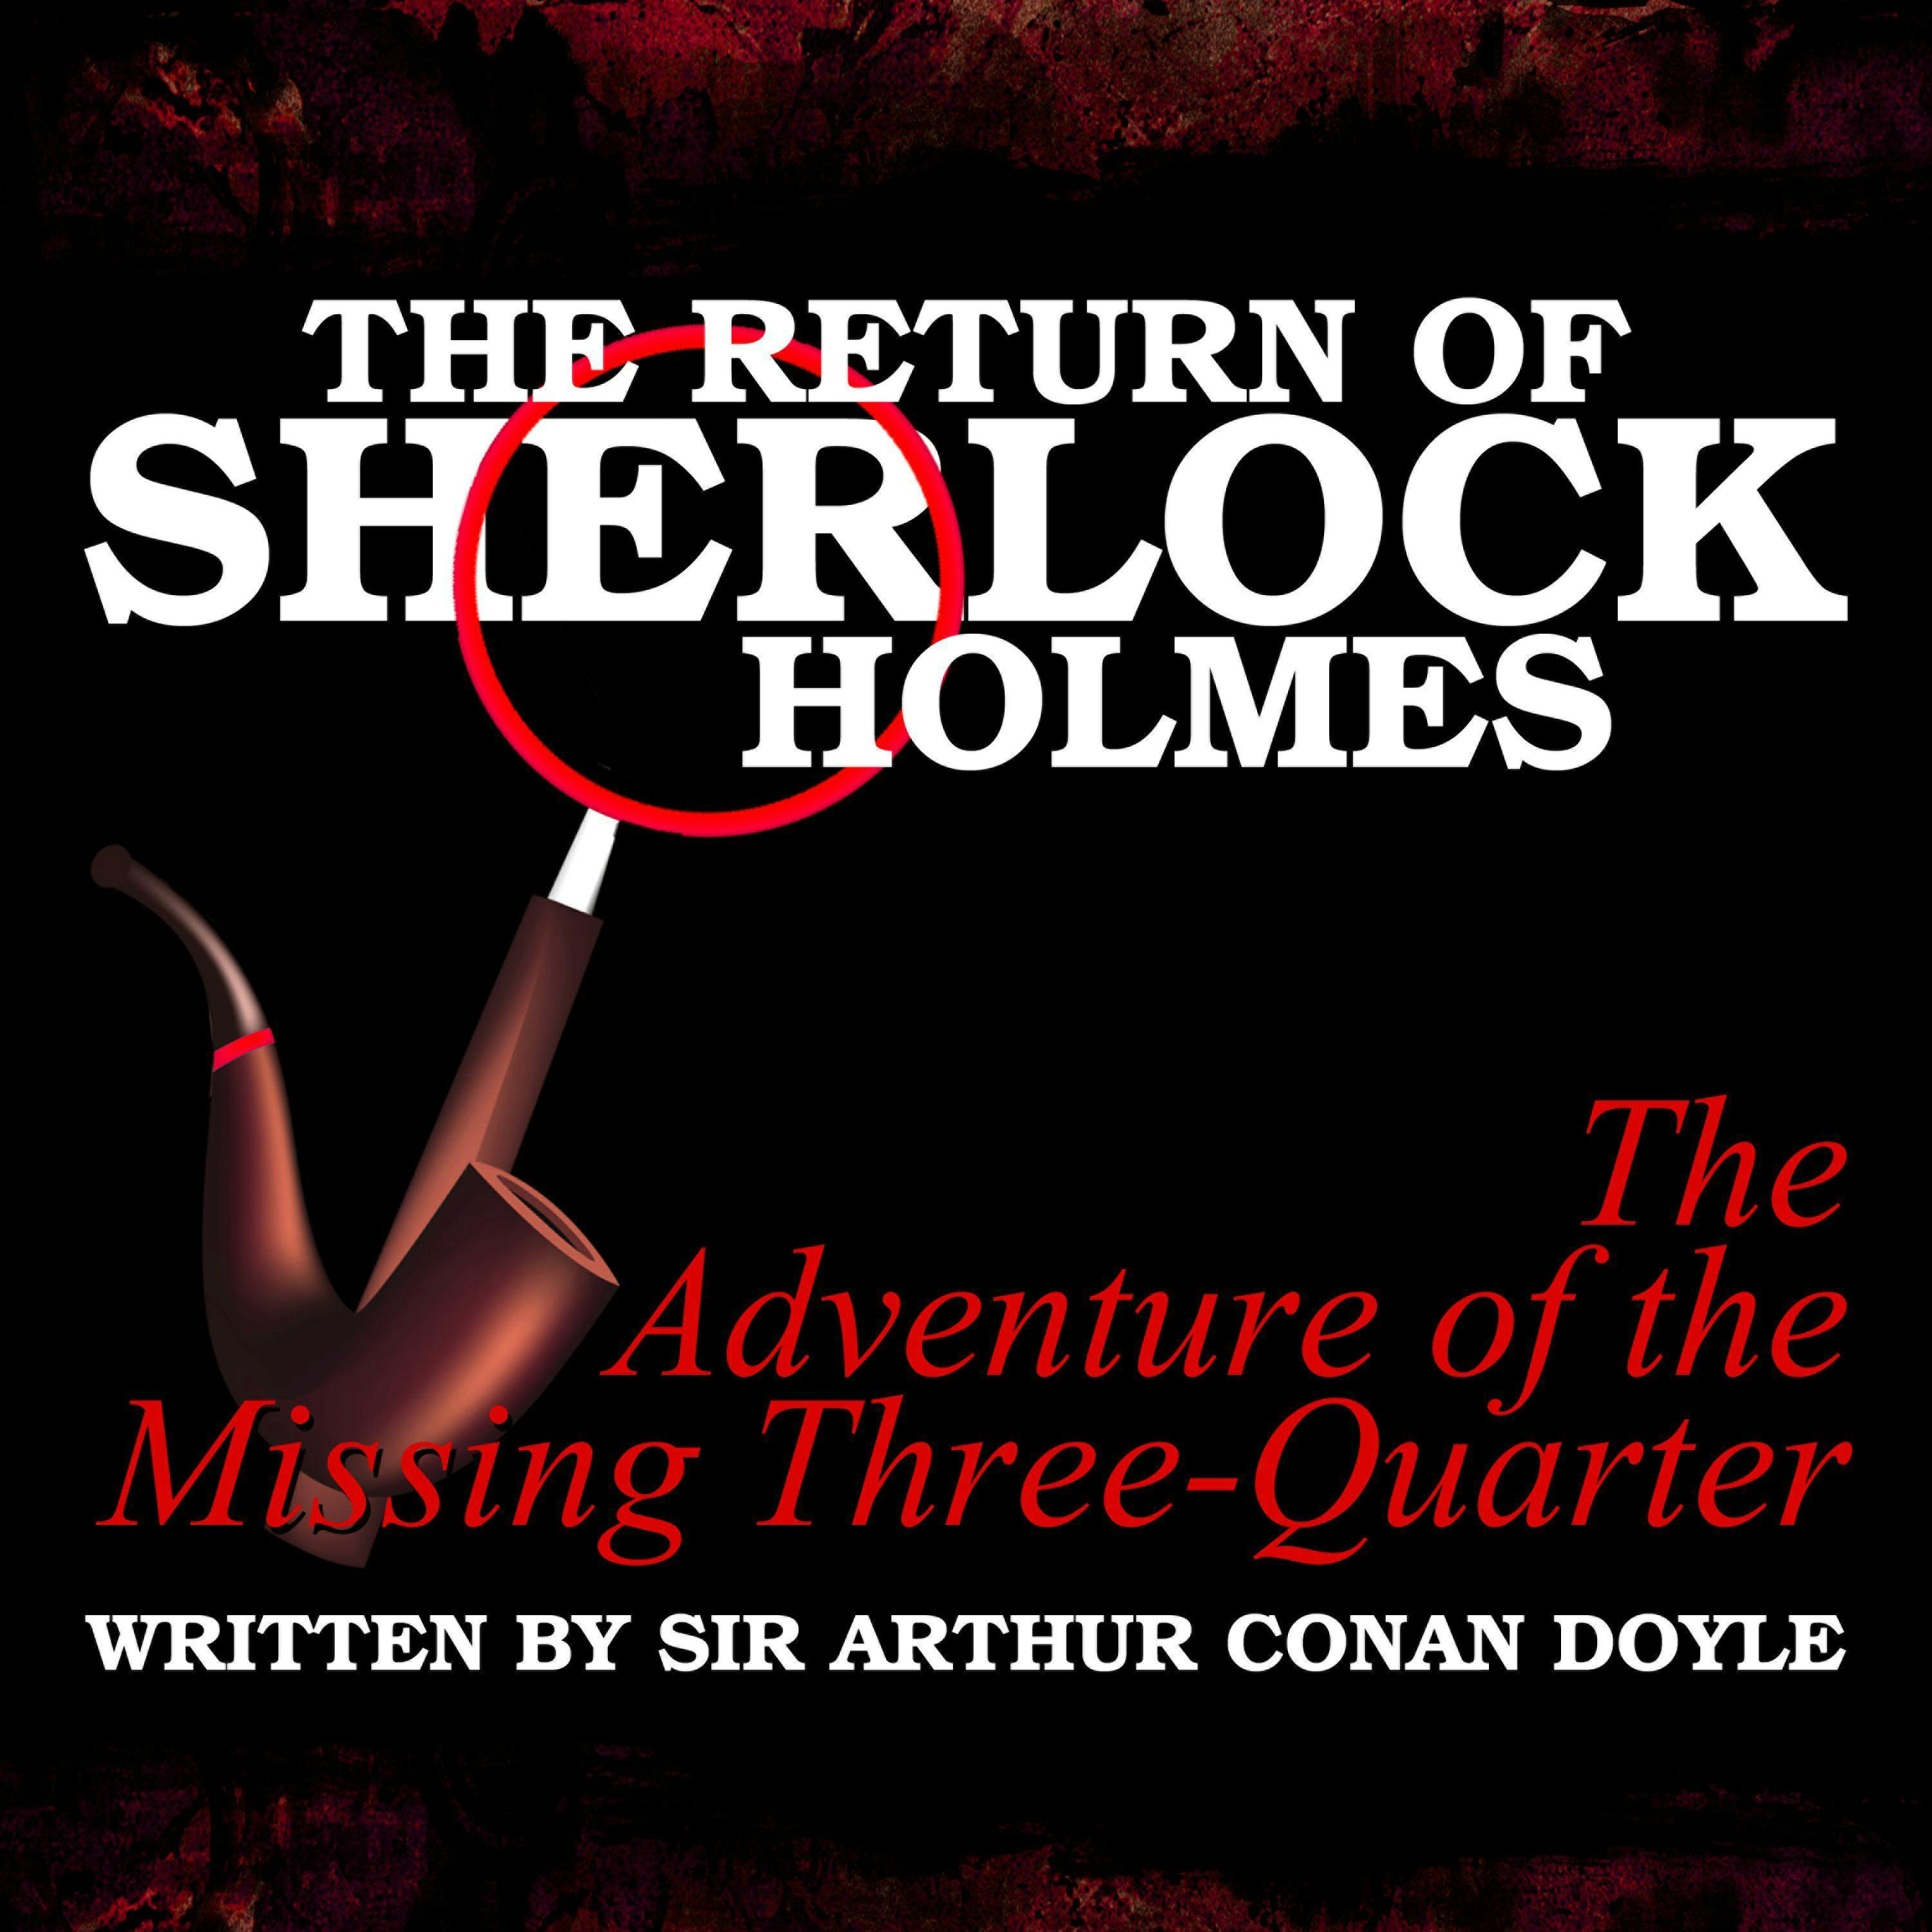 The Return of Sherlock Holmes: The Adventure of the Missing Three-Quarter - undefined